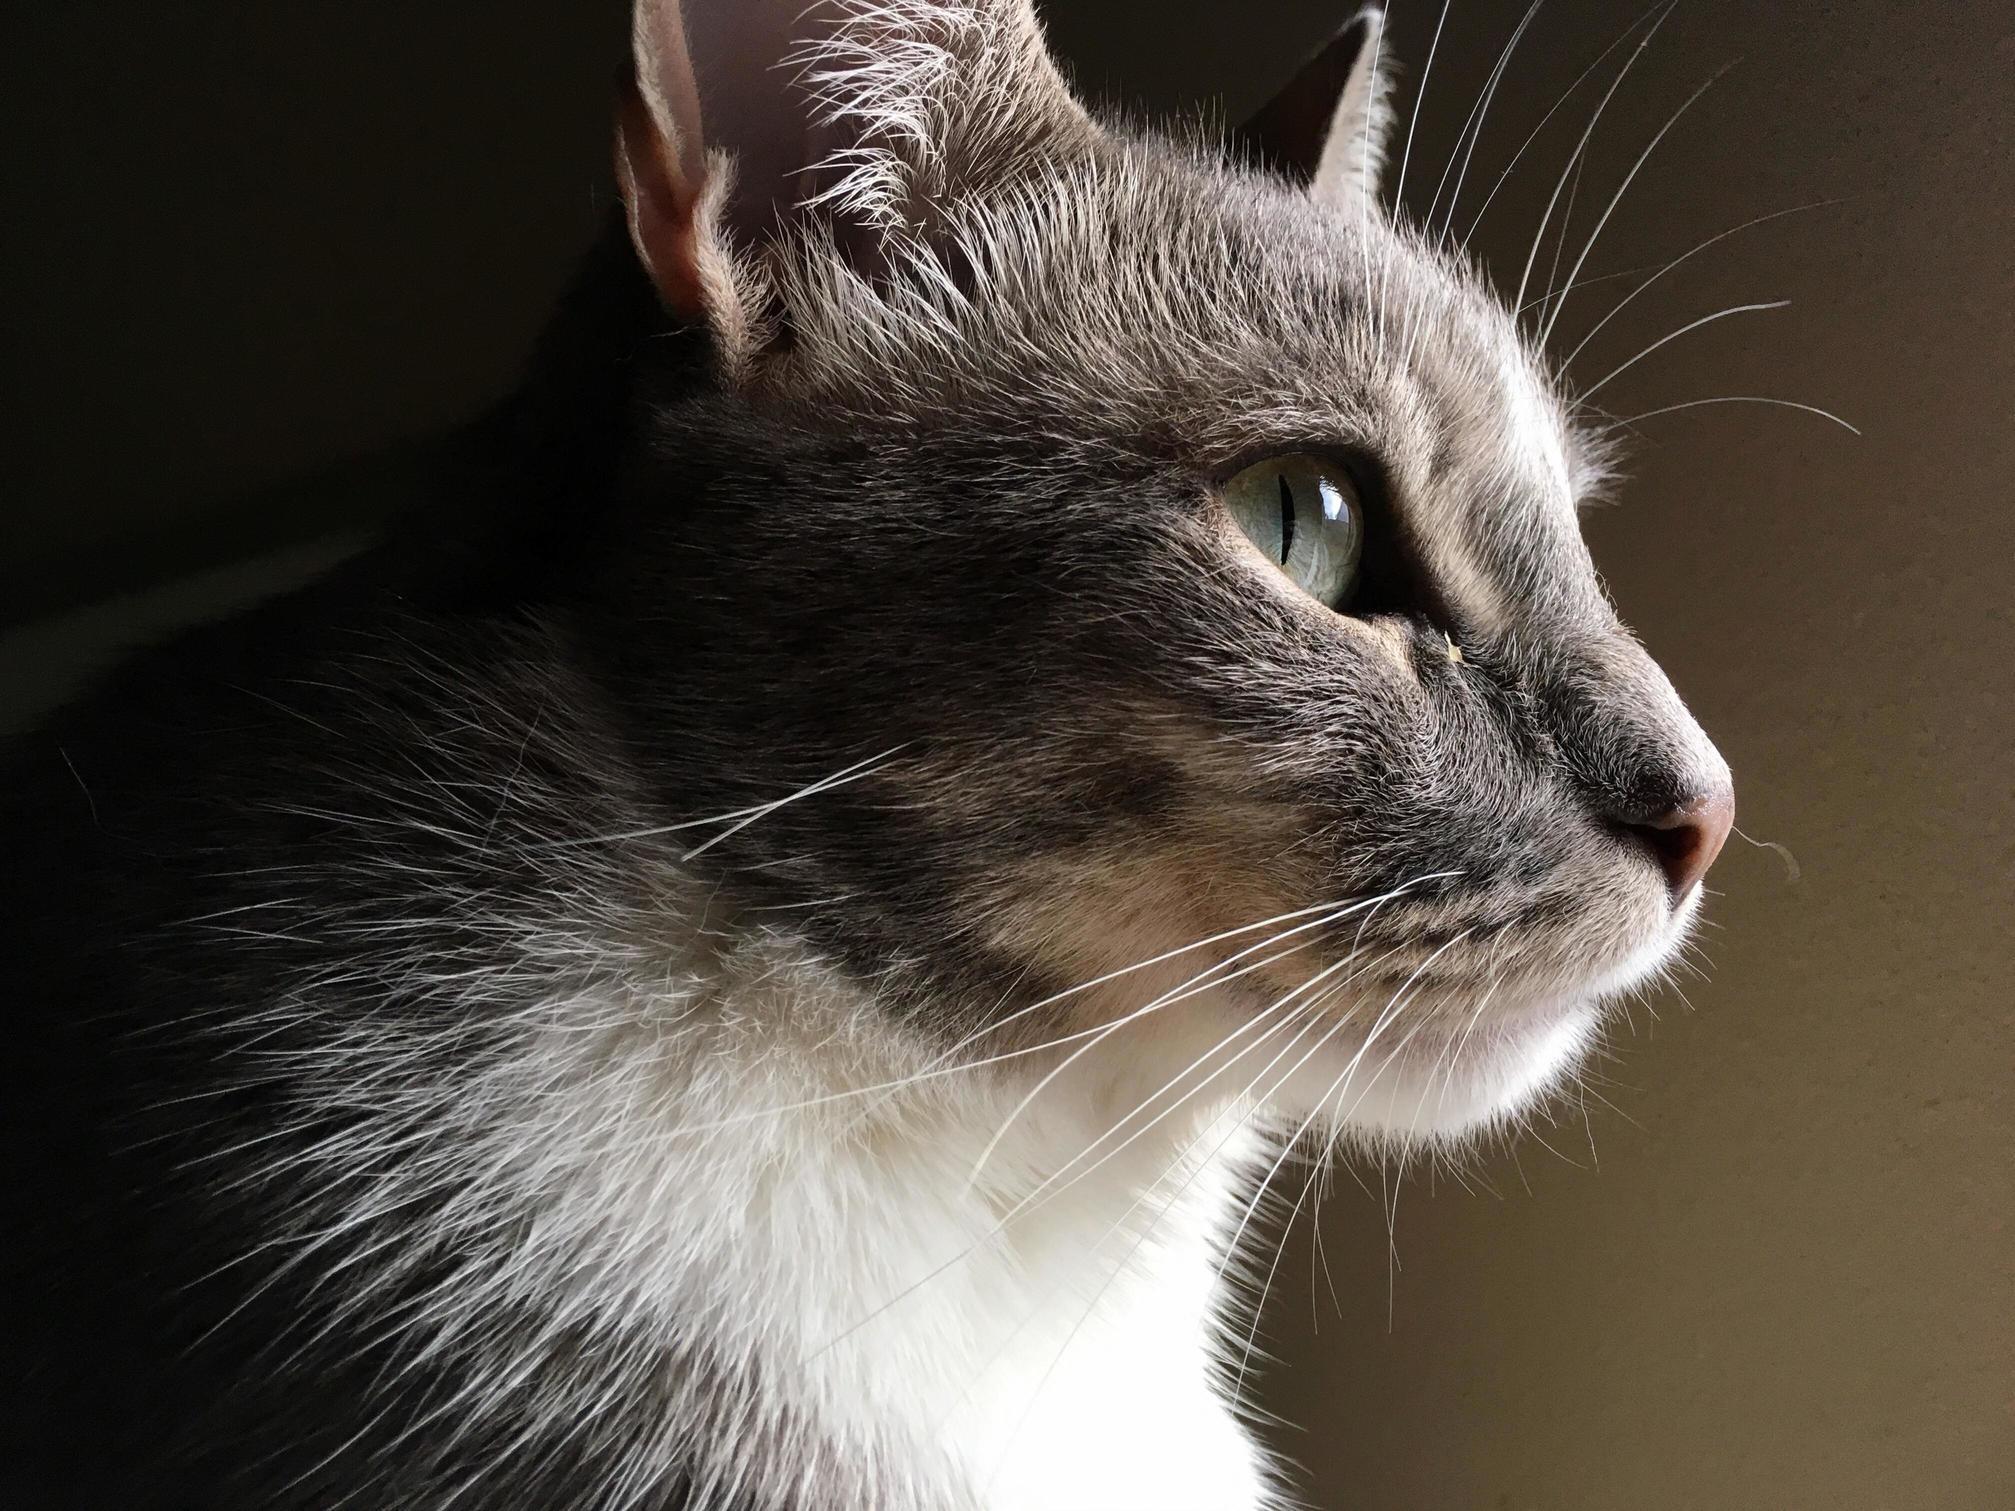 A really nice looking photo of my cat saffee. yes this was taken on a phone, not a dslr.